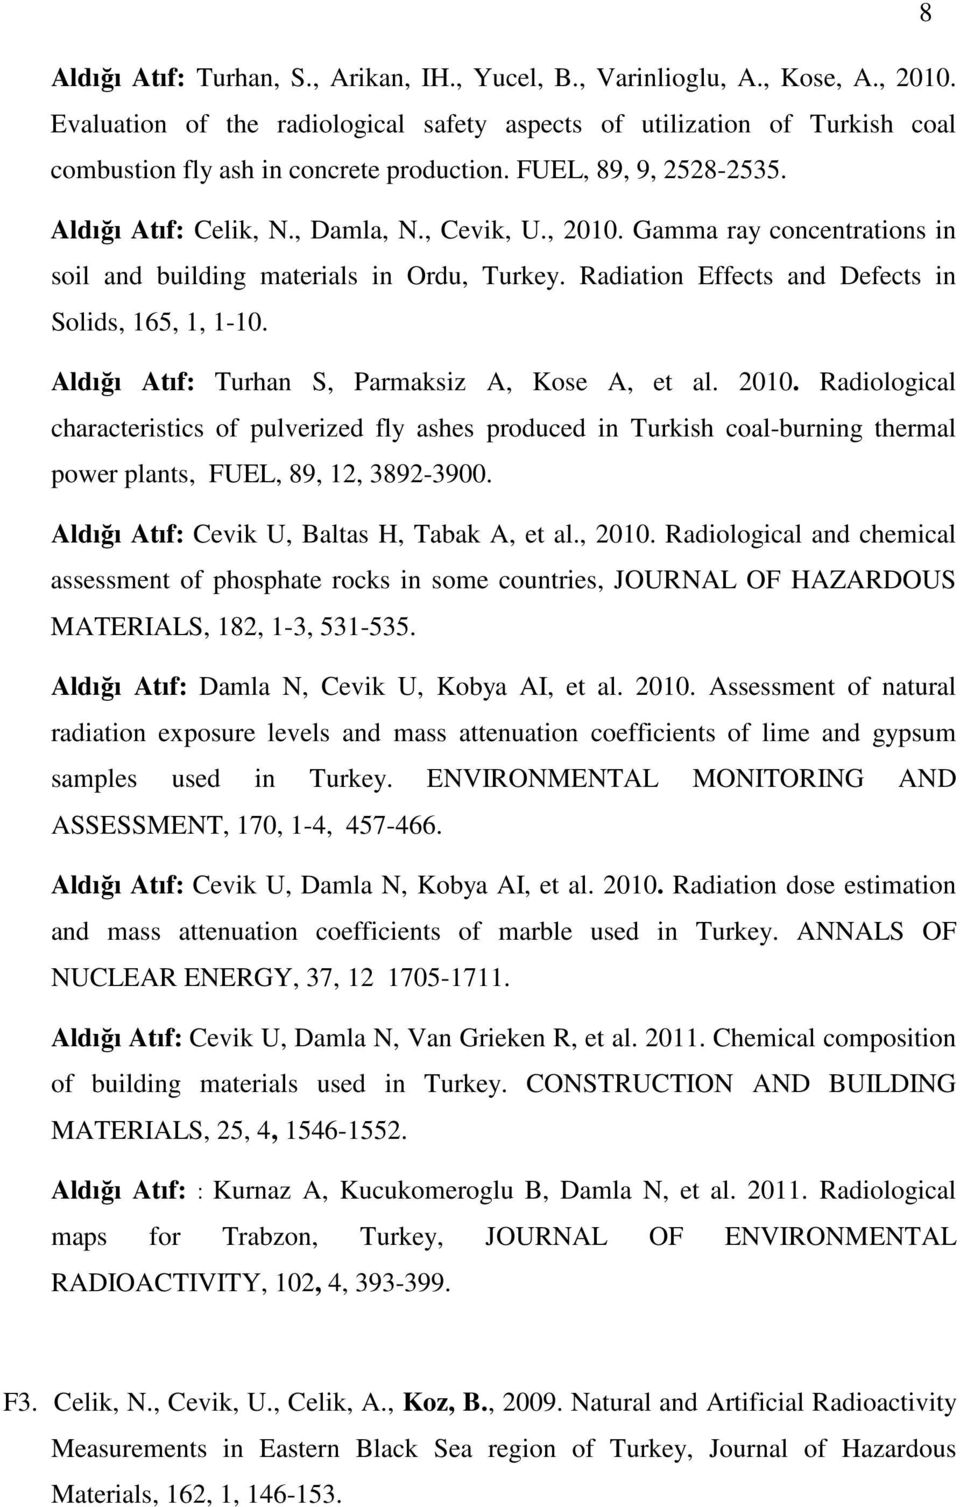 Gamma ray concentrations in soil and building materials in Ordu, Turkey. Radiation Effects and Defects in Solids, 165, 1, 1-10. Aldığı Atıf: Turhan S, Parmaksiz A, Kose A, et al. 2010.